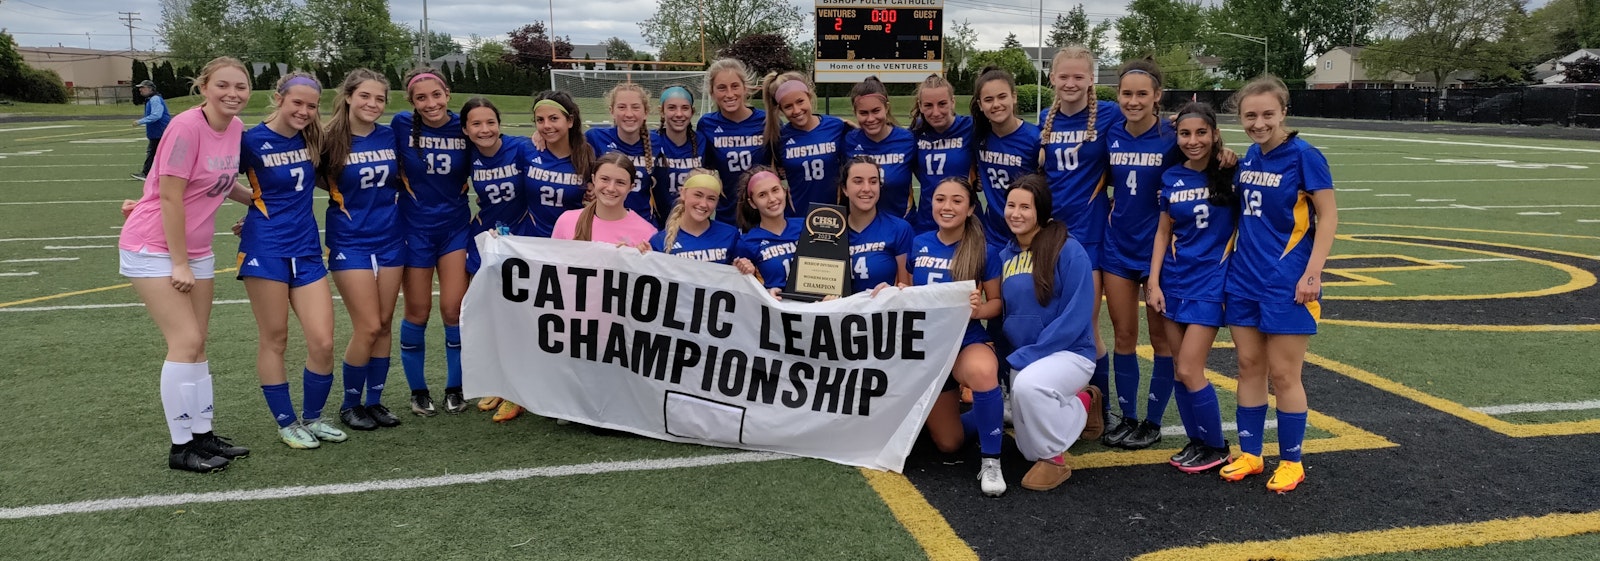 Marian defeated Regina, 2-1, for the Catholic League girls soccer Bishop Trophy. It was the Mustangs' second CHSL title in a row and 19th in its history.